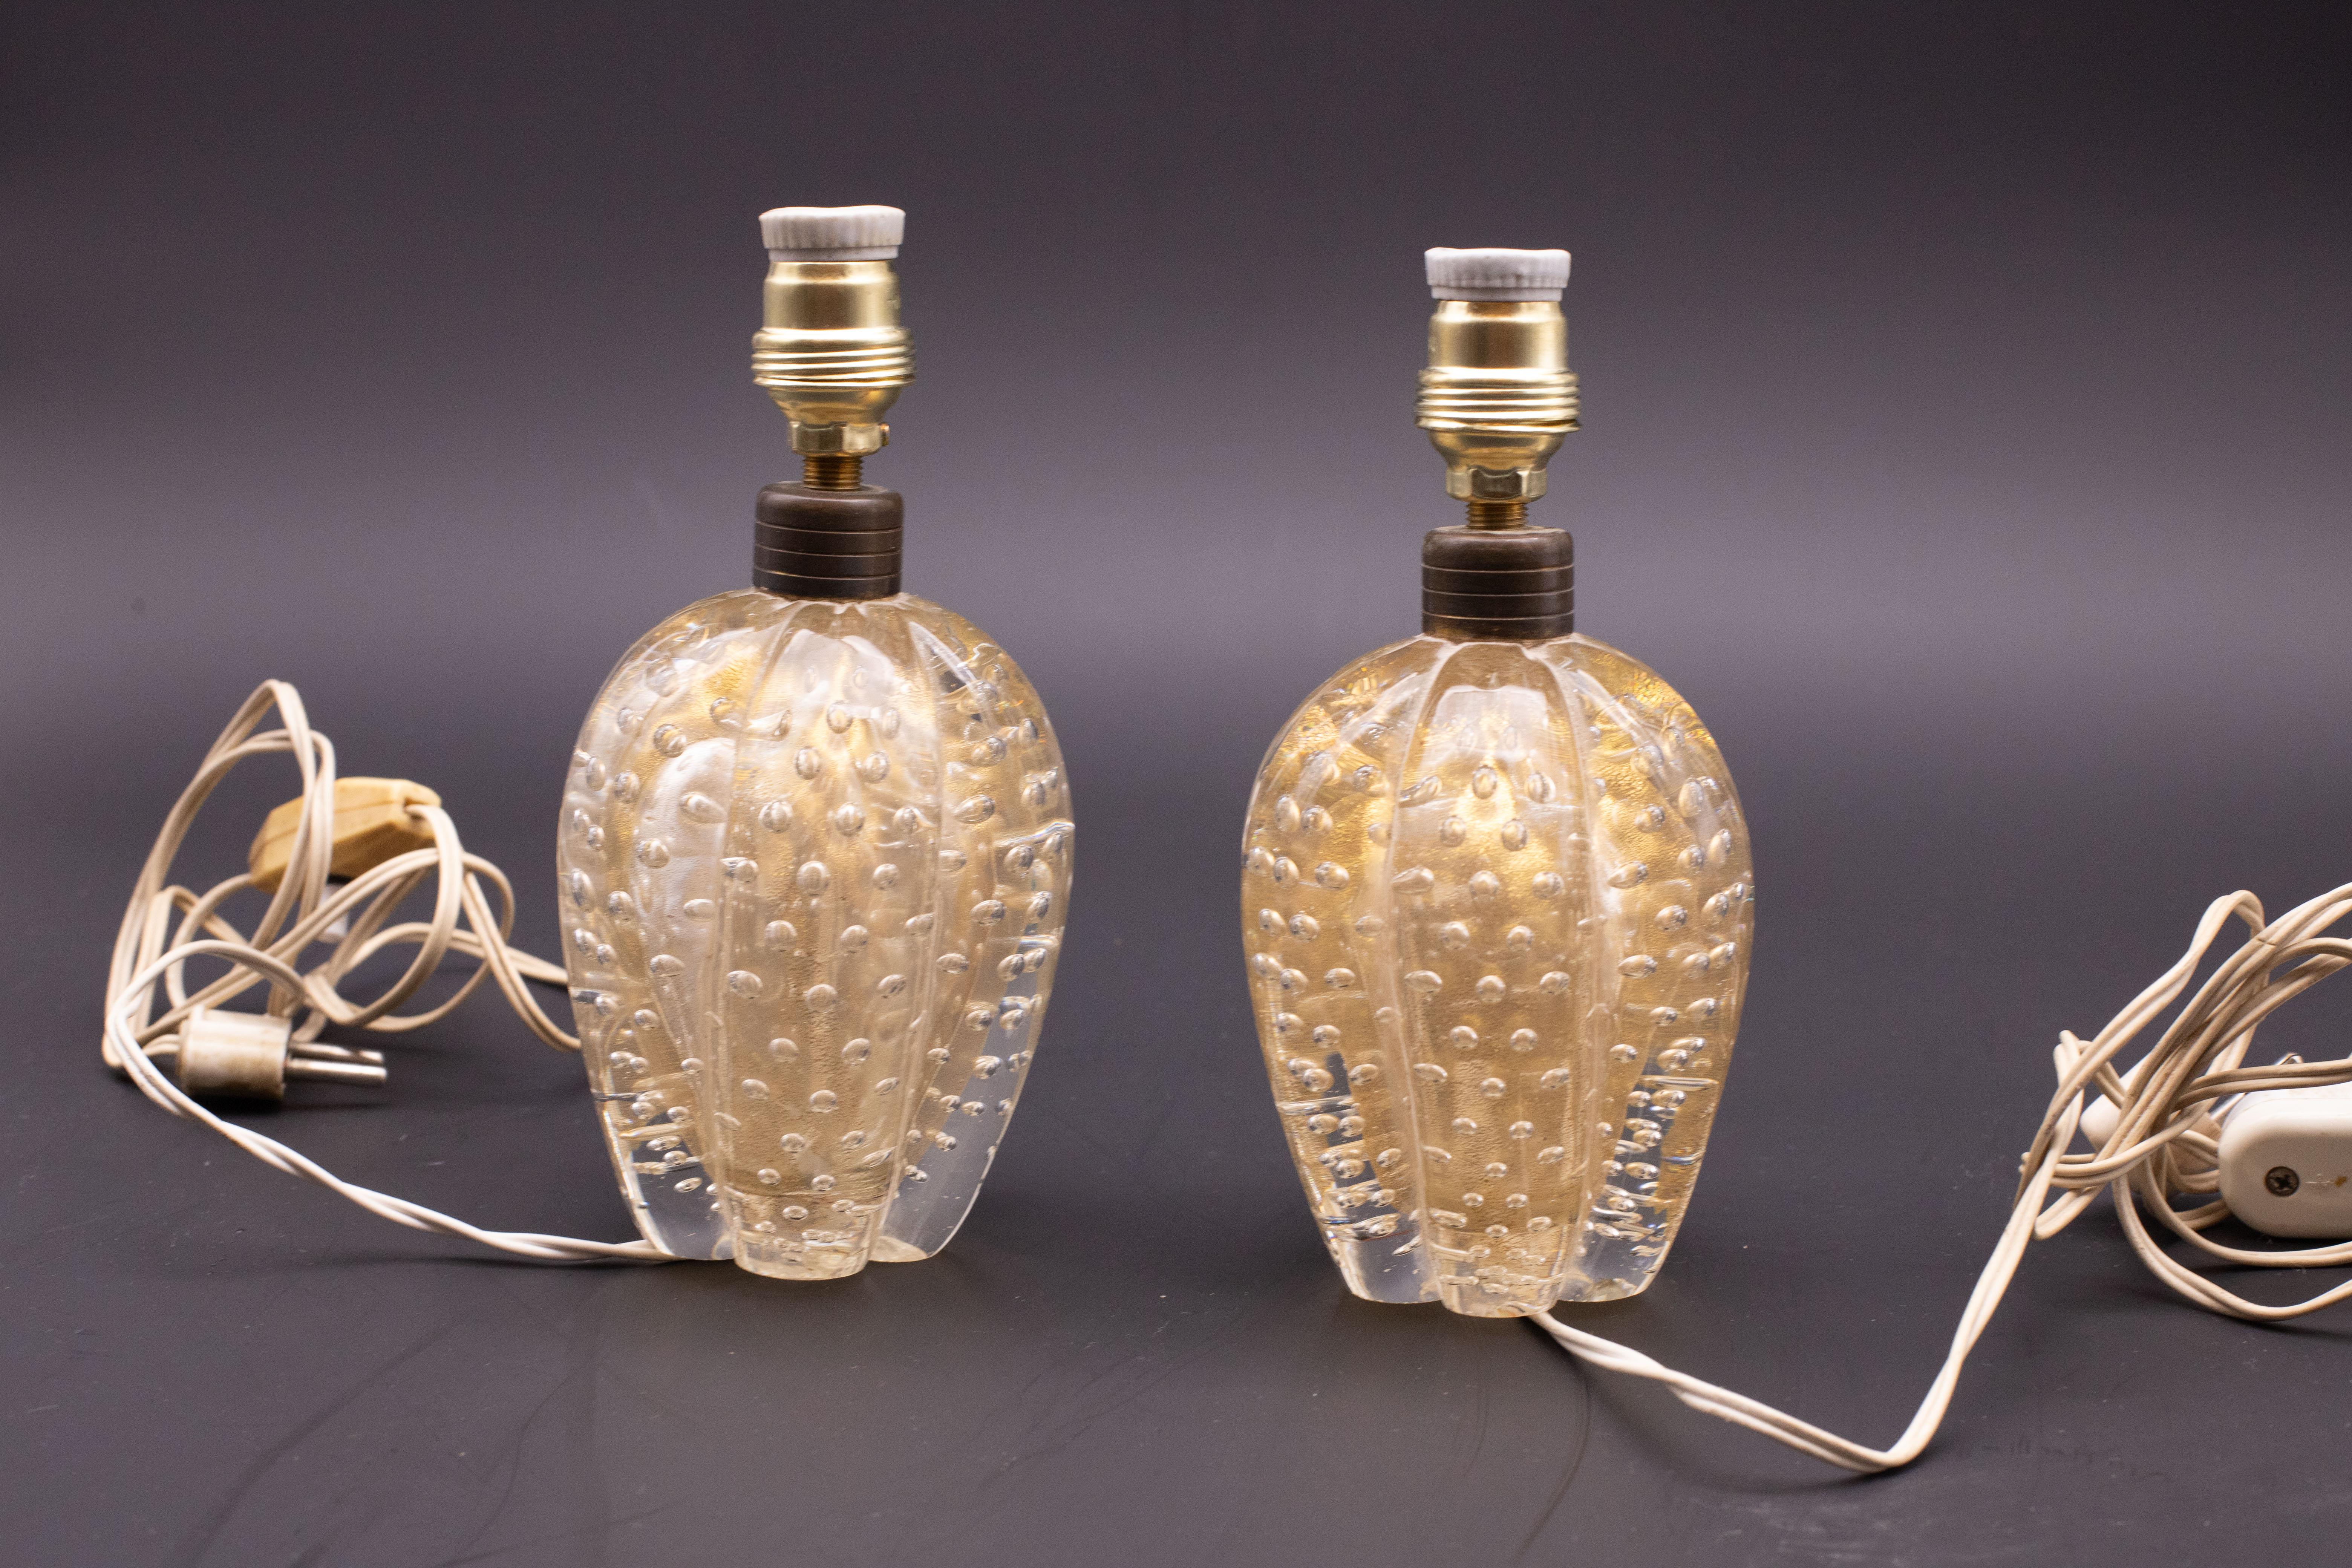 Set of 2 Table Lamp Art Decò by Barovier e Toso, Murano Gold Bubble Glass, 1950s For Sale 5